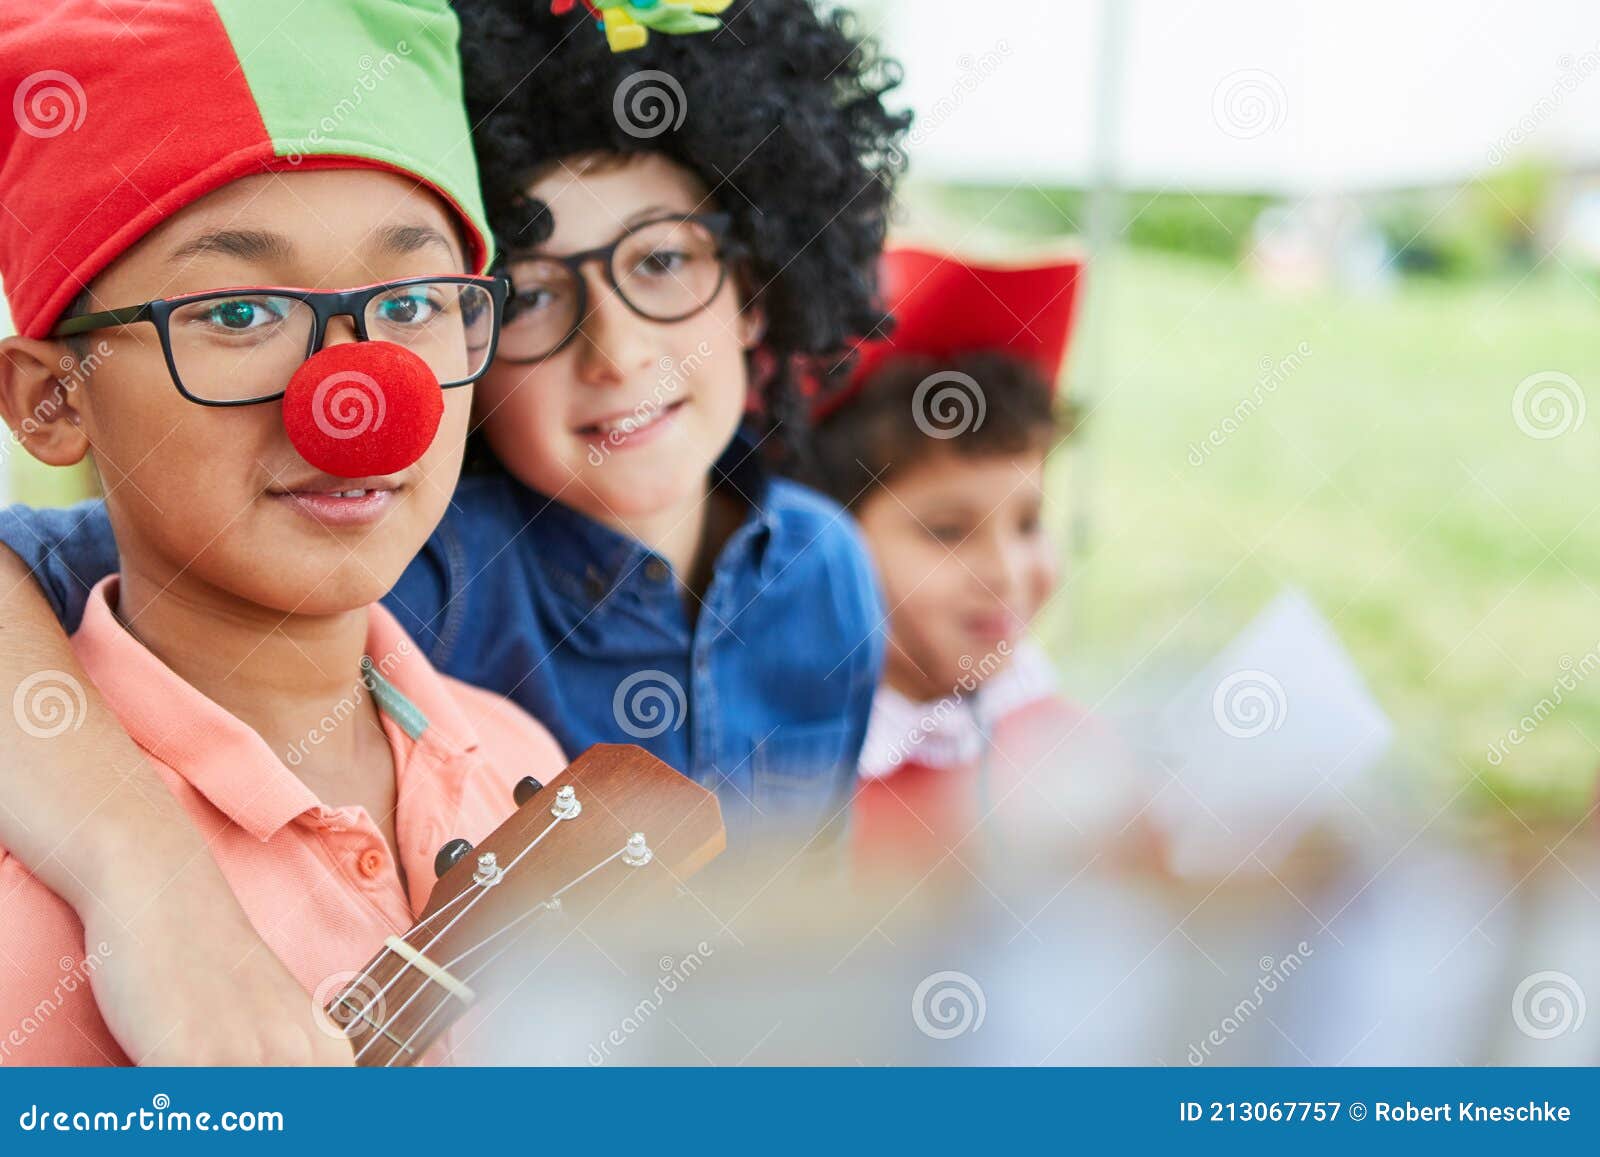 Children in Funny Disguise at the Talent Show Stock Image - Image of kids,  play: 213067757